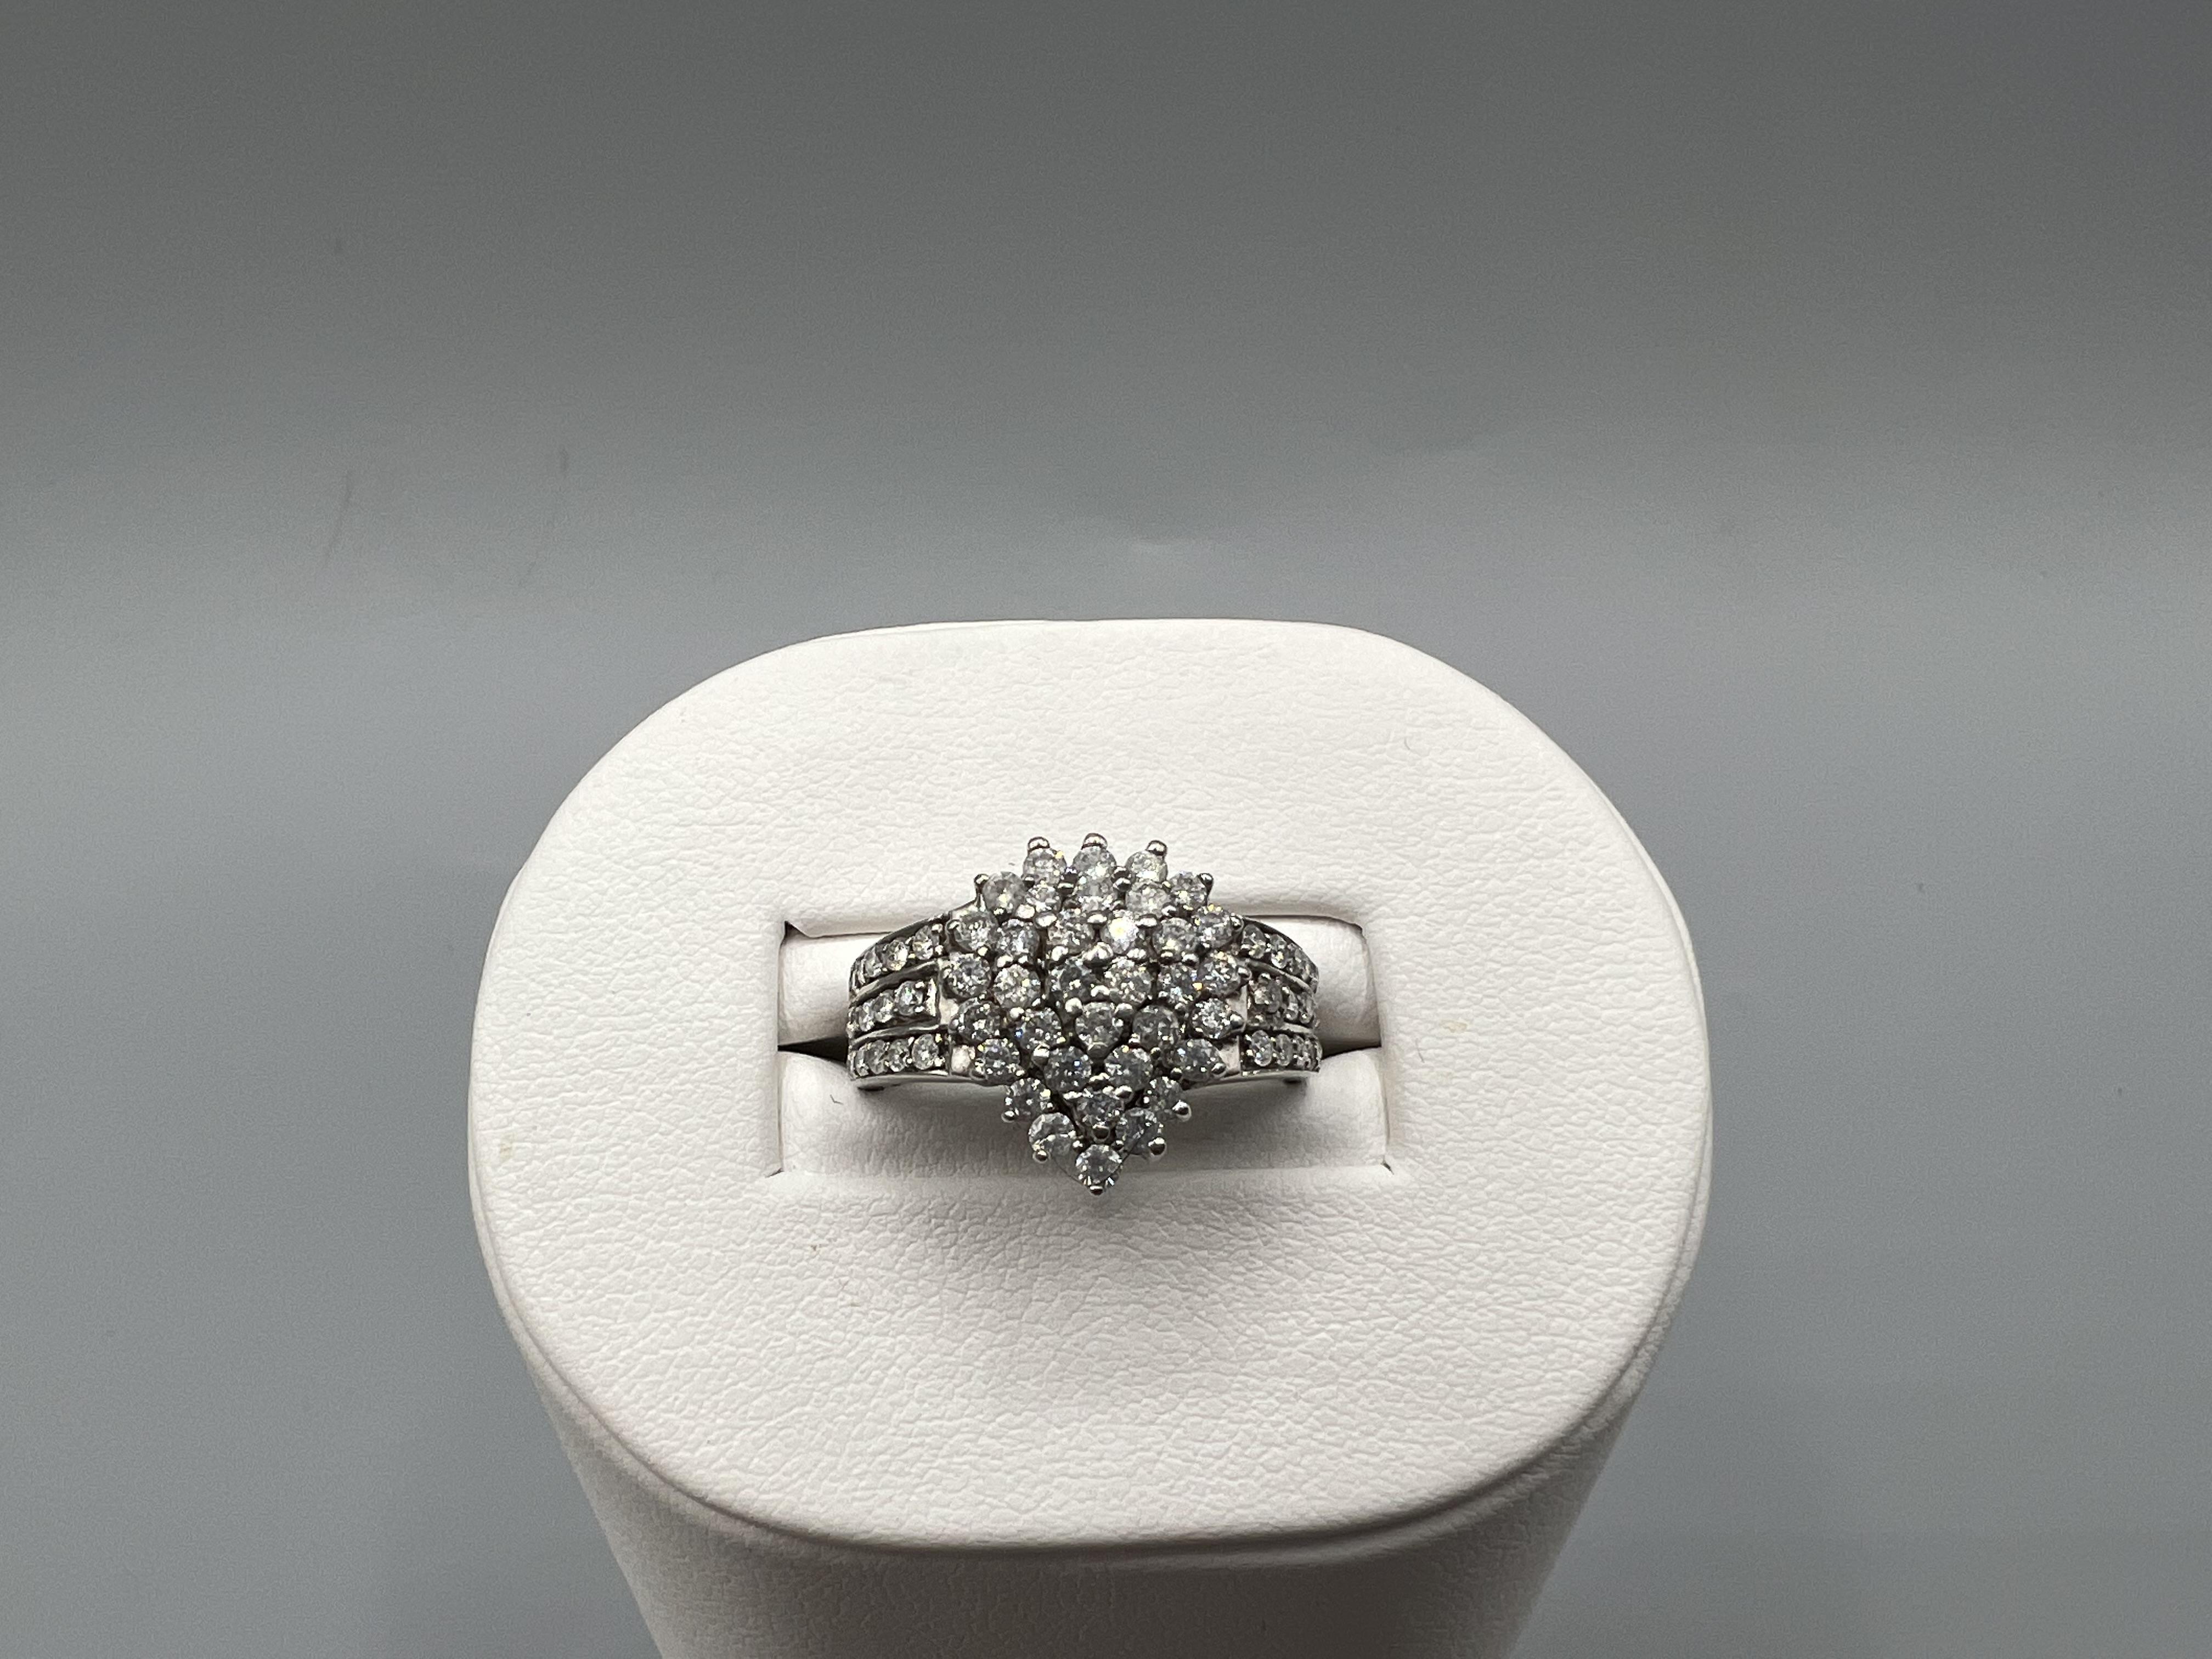 1ct Diamond Pear Shaped Cluster Ring - 4.1g - Image 2 of 3